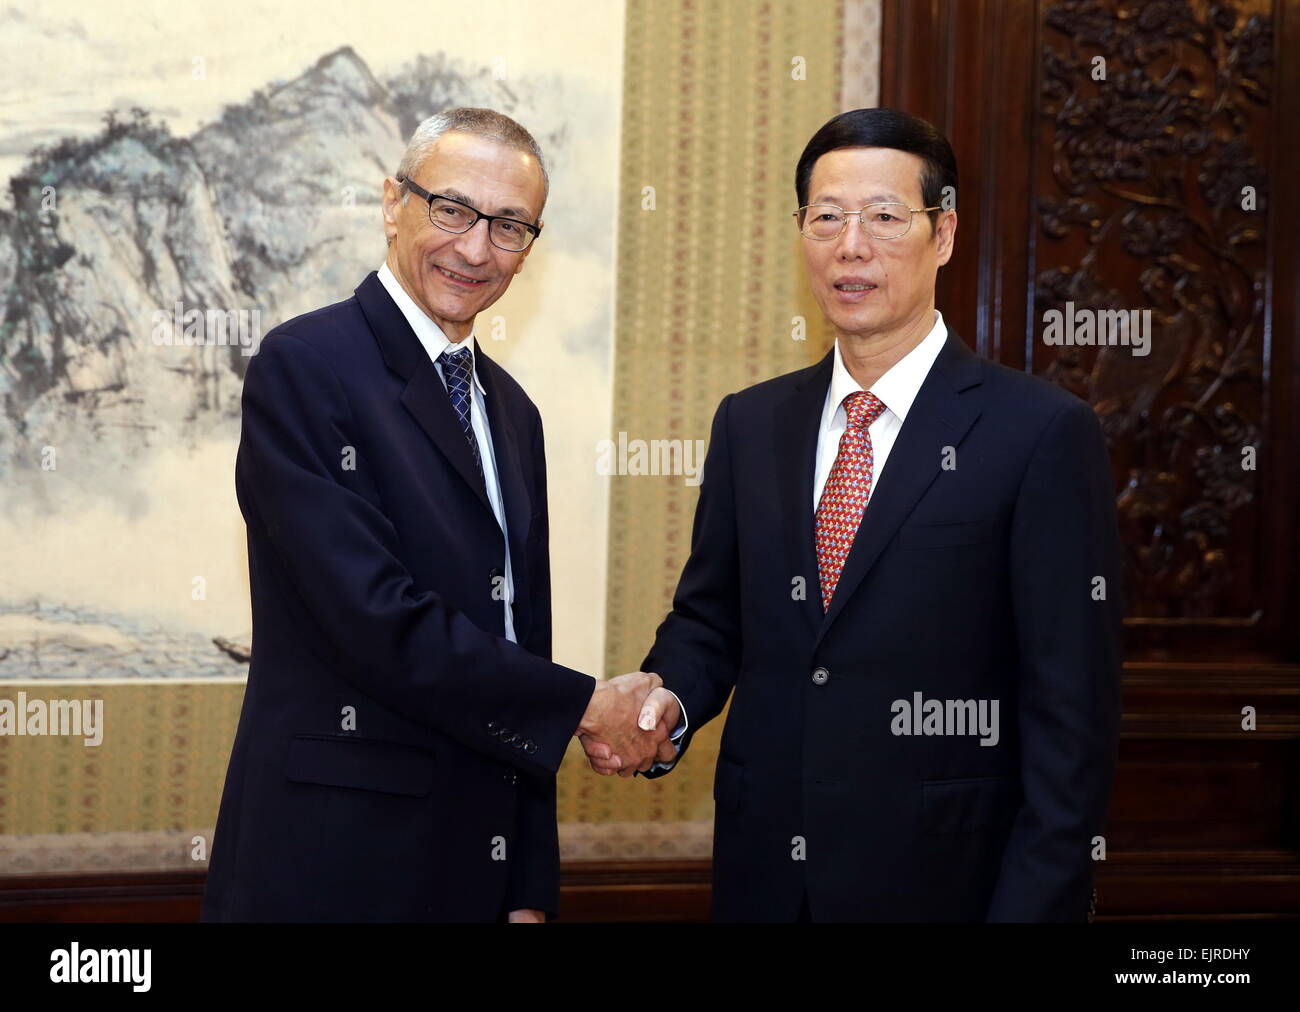 Beijing, China. 31st Mar, 2015. Chinese Vice Premier Zhang Gaoli (R) shakes hands with John Podesta, founder of the Center for American Progress (CAP) of the United States and former chief of staff to then U.S. President Bill Clinton, during their meeting in Beijing, capital of China, March 31, 2015. © Ju Peng/Xinhua/Alamy Live News Stock Photo